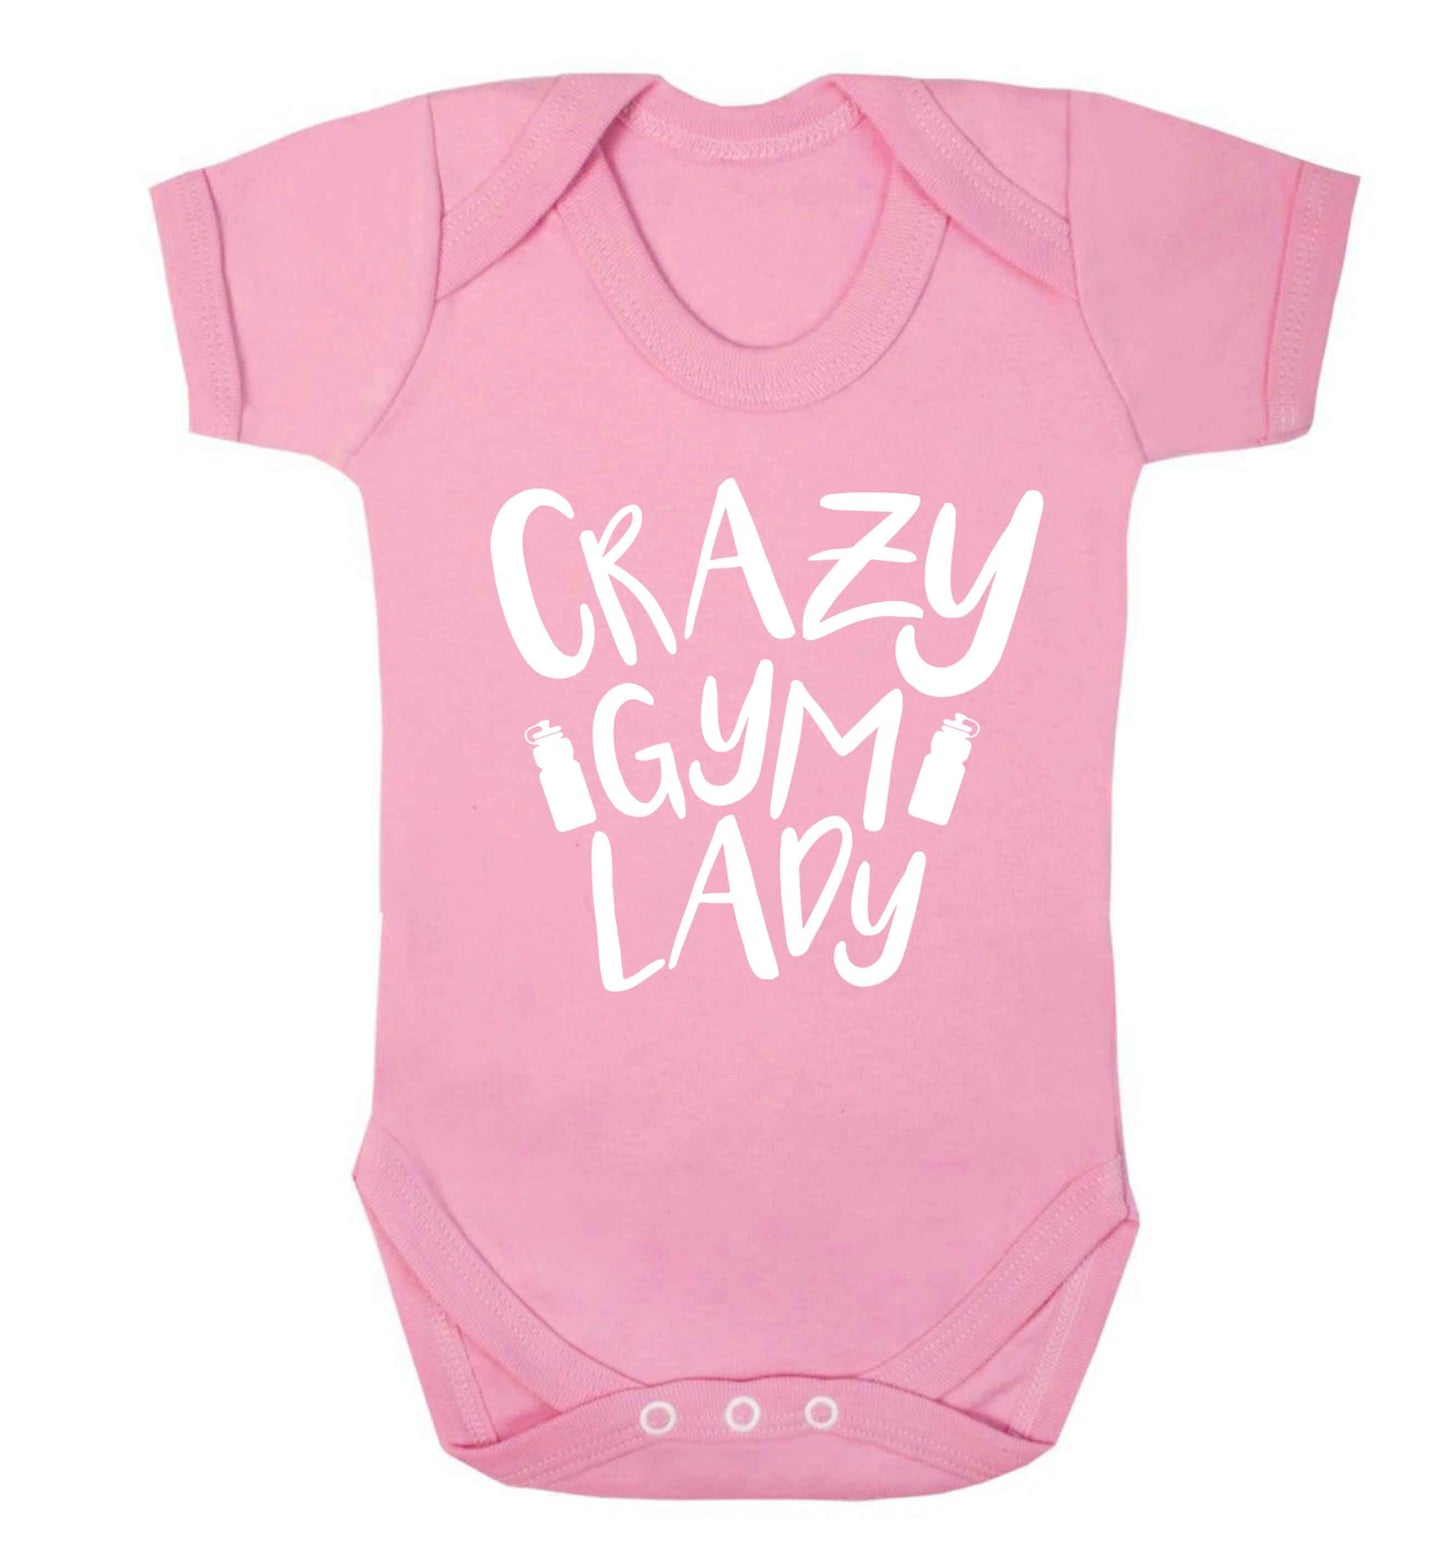 Crazy gym lady Baby Vest pale pink 18-24 months